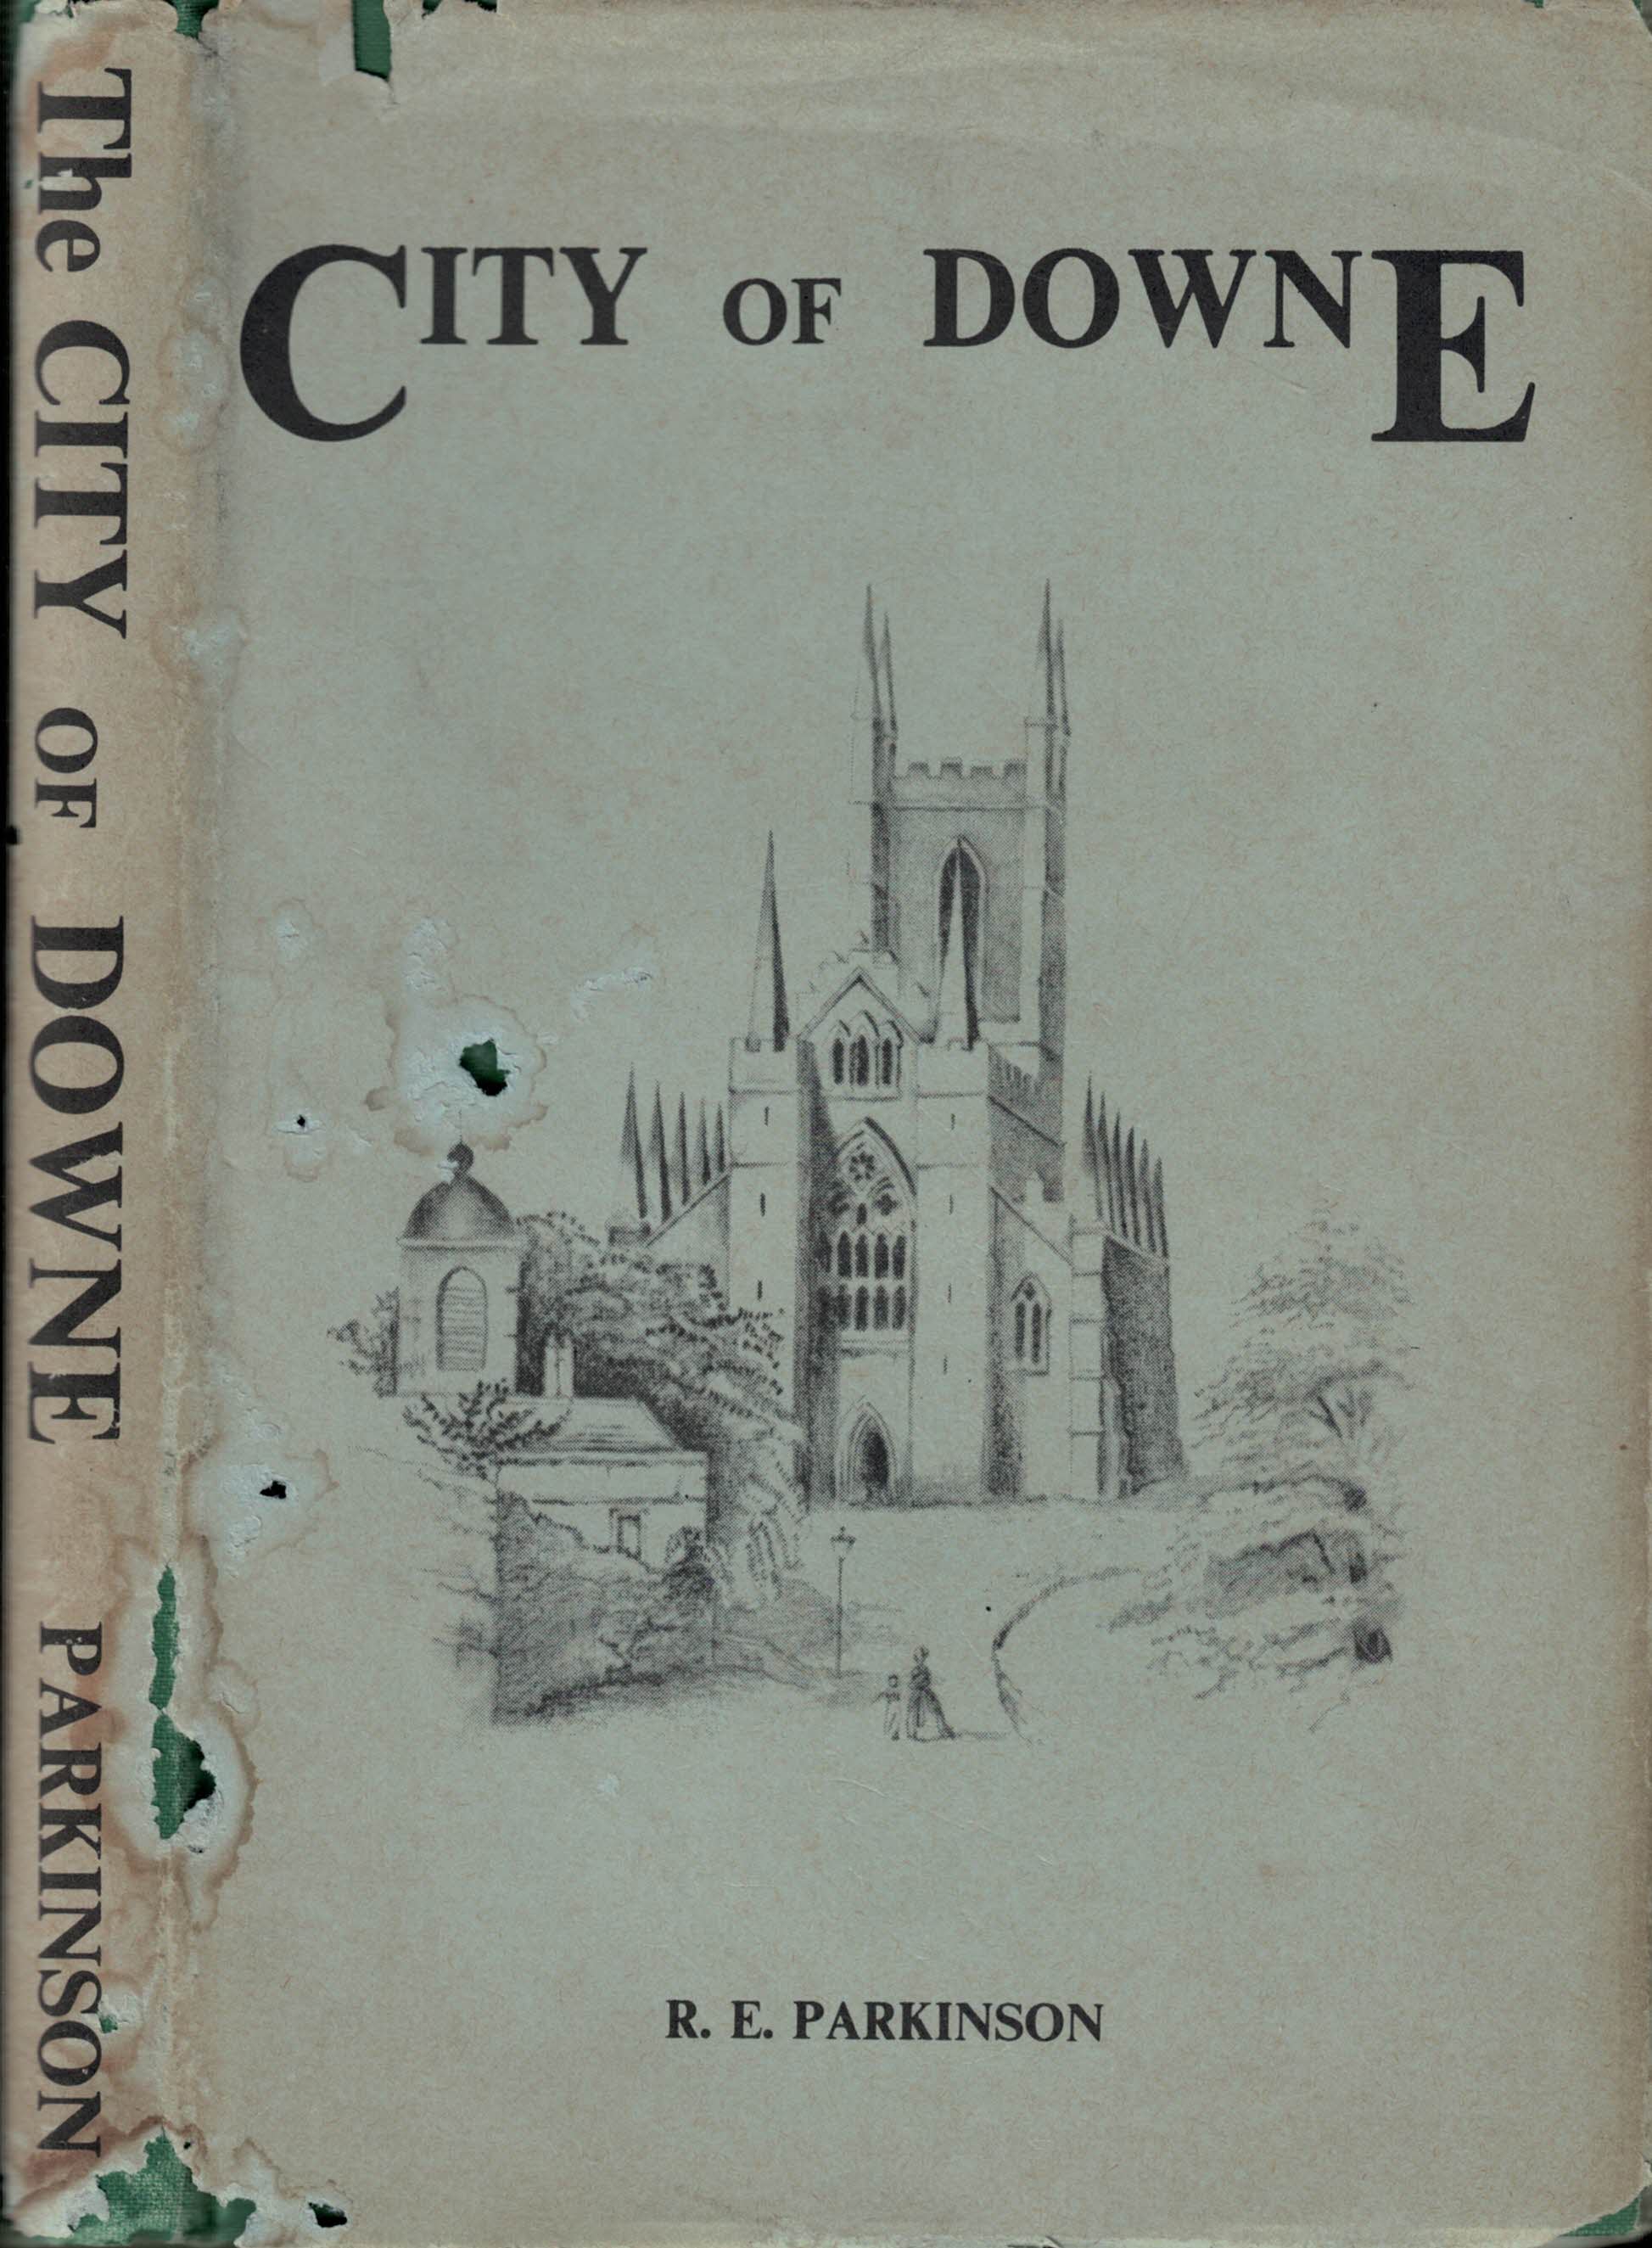 The City of Downe. From its Earliest Days.